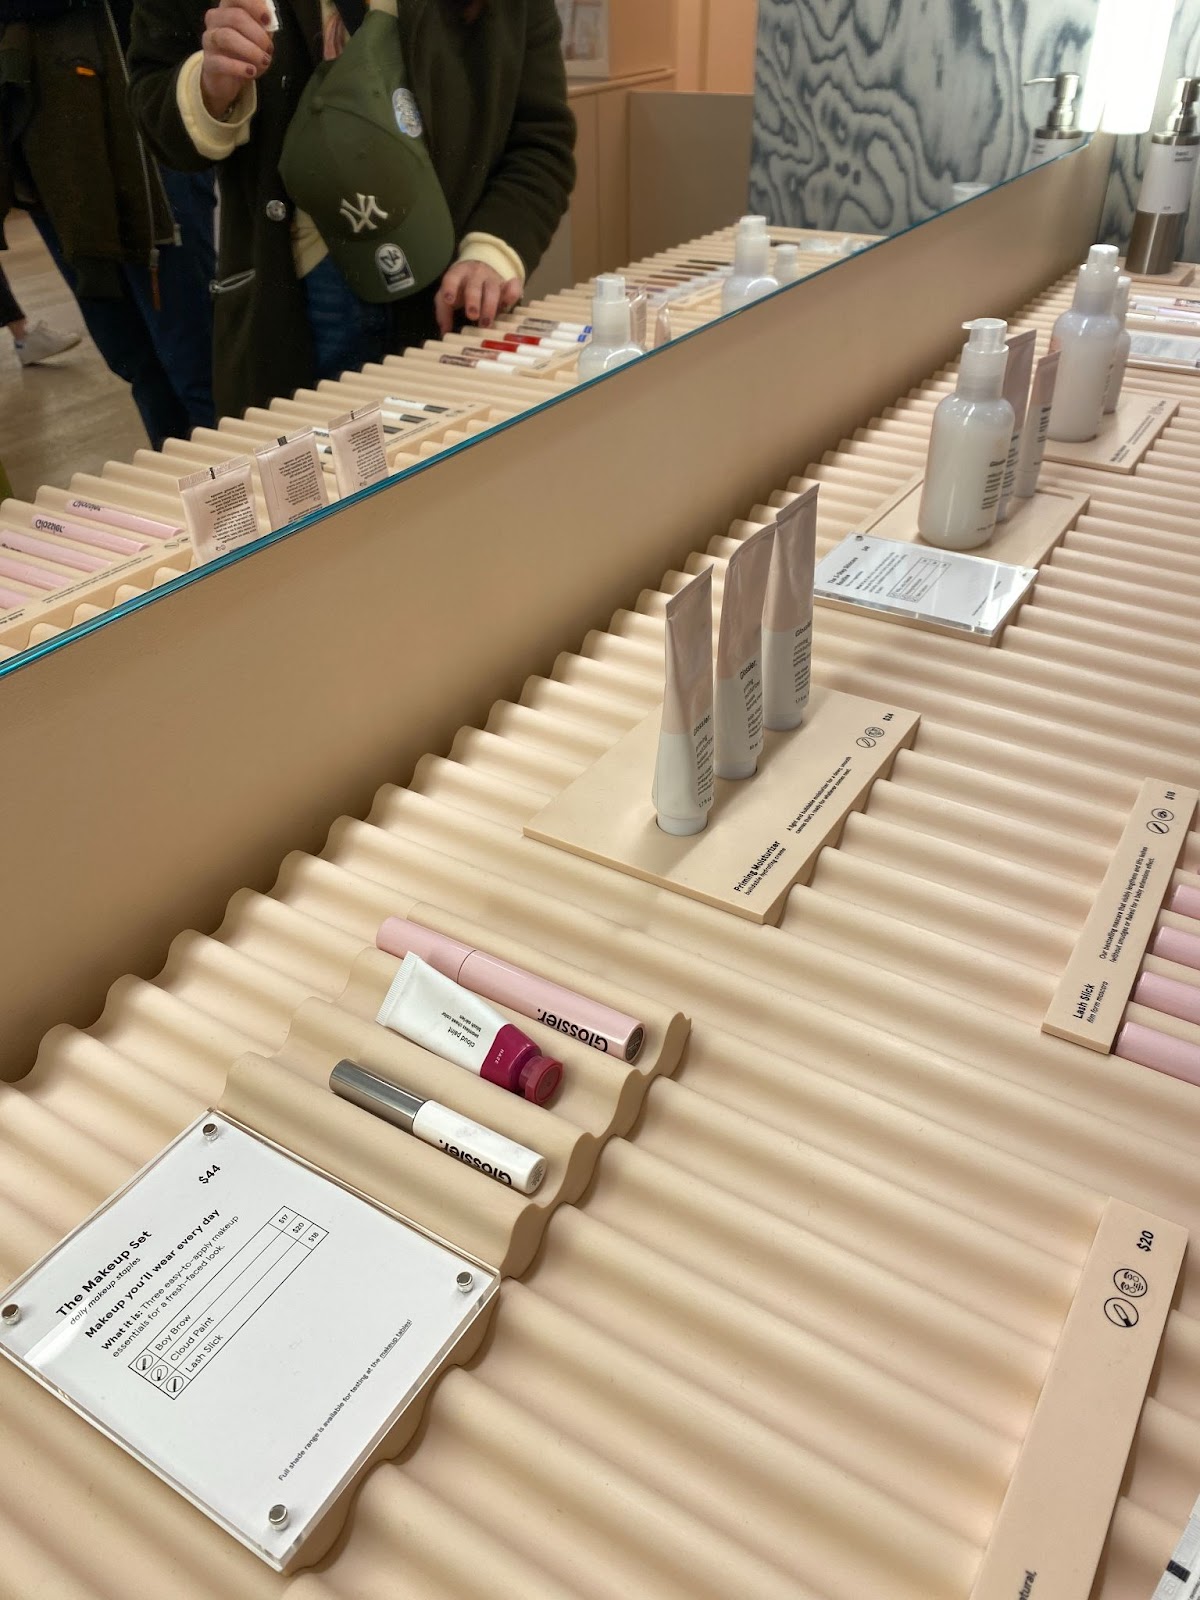 An image of Glossier's same product bundle in a physical retail location.